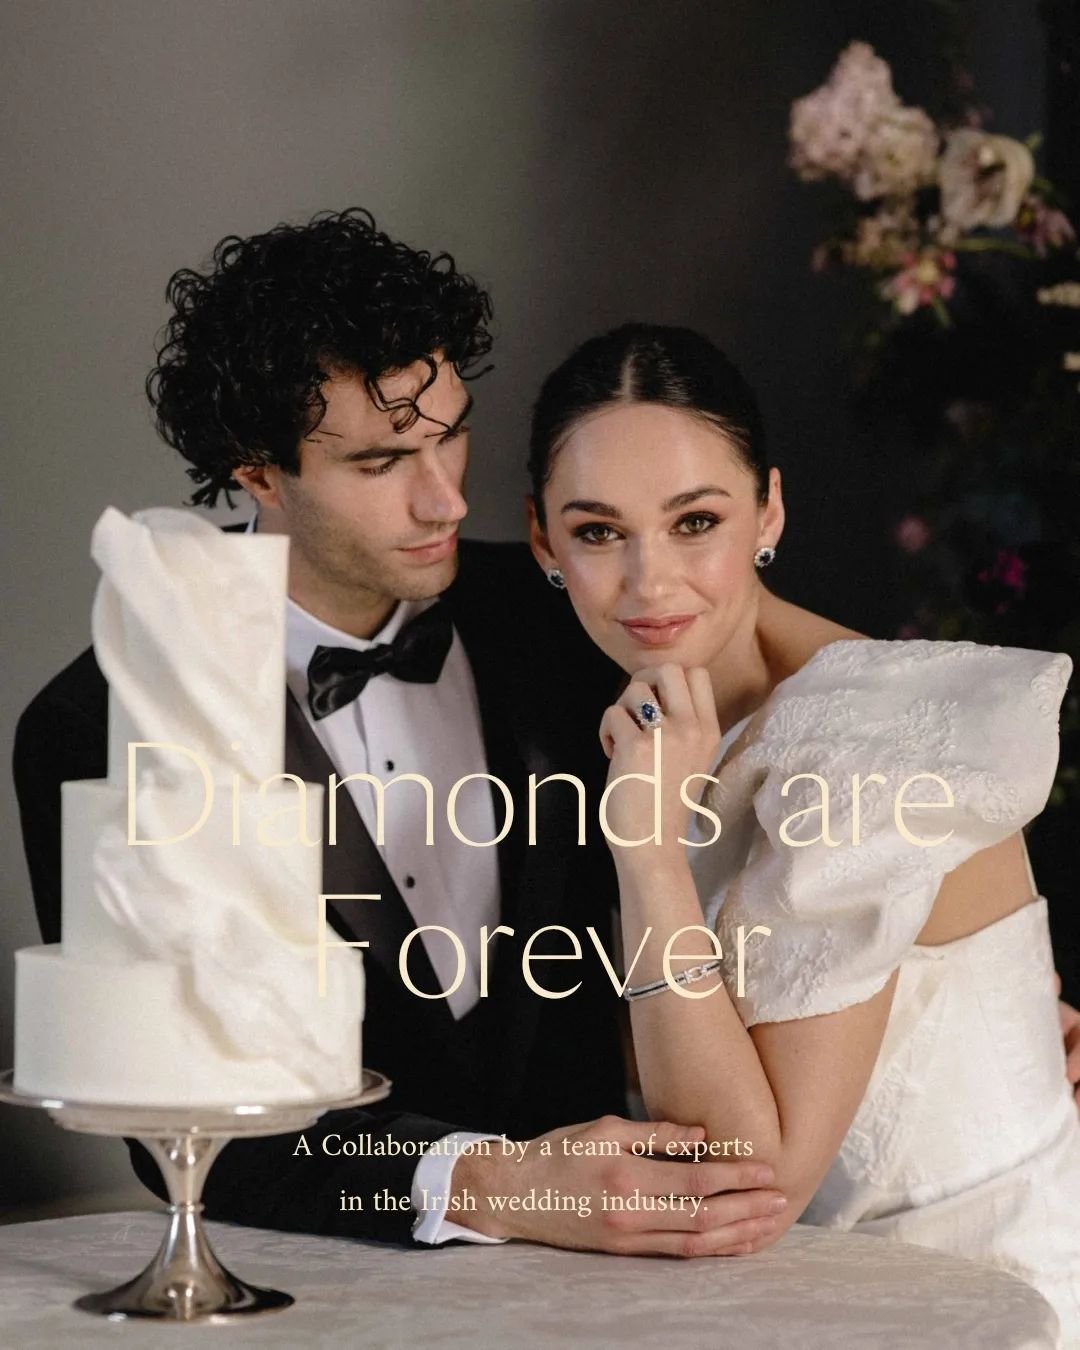 A preview of 'Diamonds are Forever' - Look II
An exlusive collaboration with the very best in the wedding industry. 

Venue @luttrellstowncastleresort
Photography @michellepruntyphotography
Videography @shanepruntyfilms
Make up @fionaharrisonmakeup
D